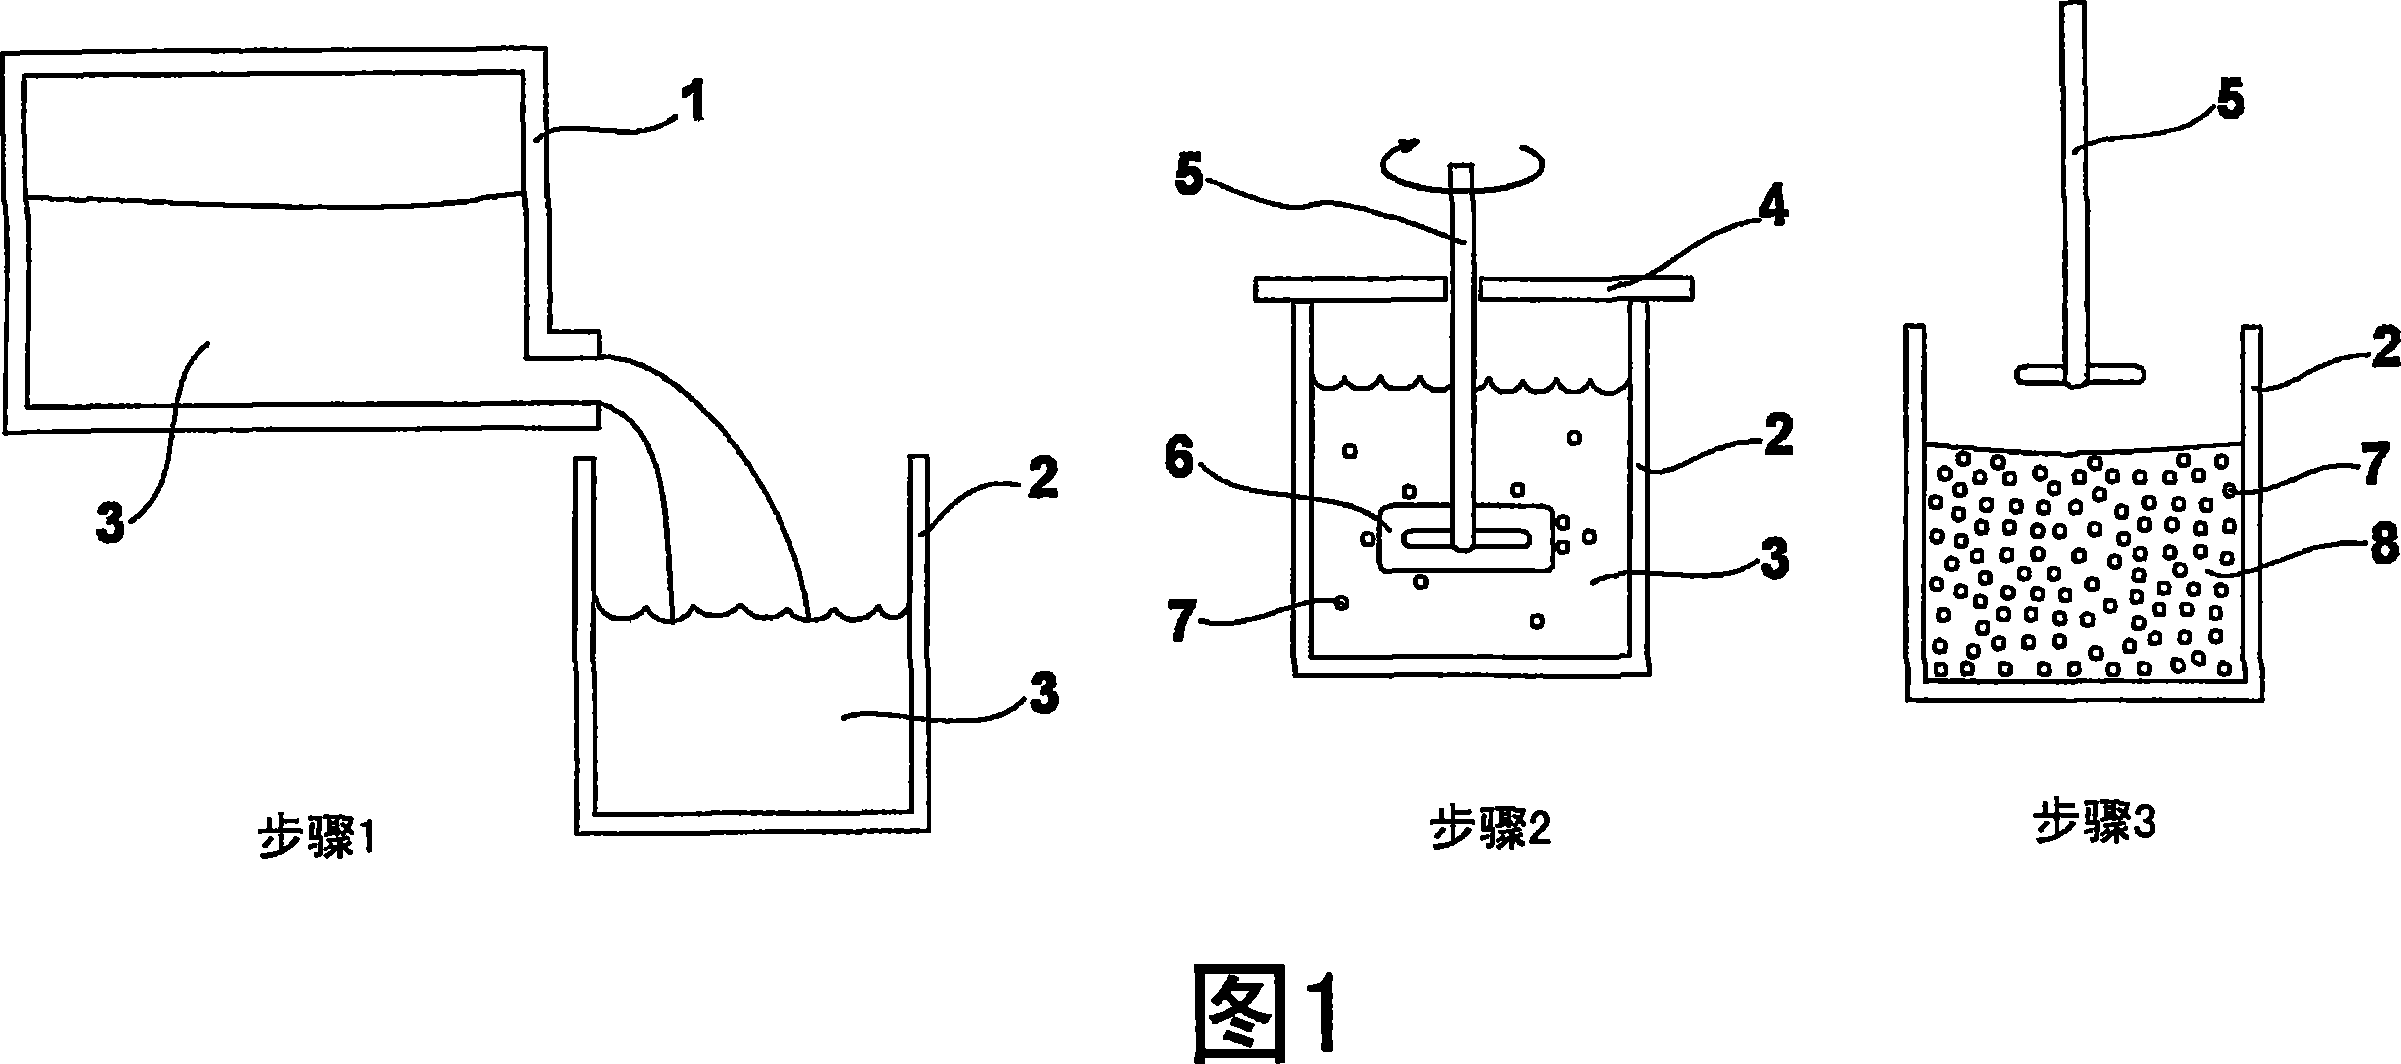 A method of and a device for producing a liquid-solid metal composition